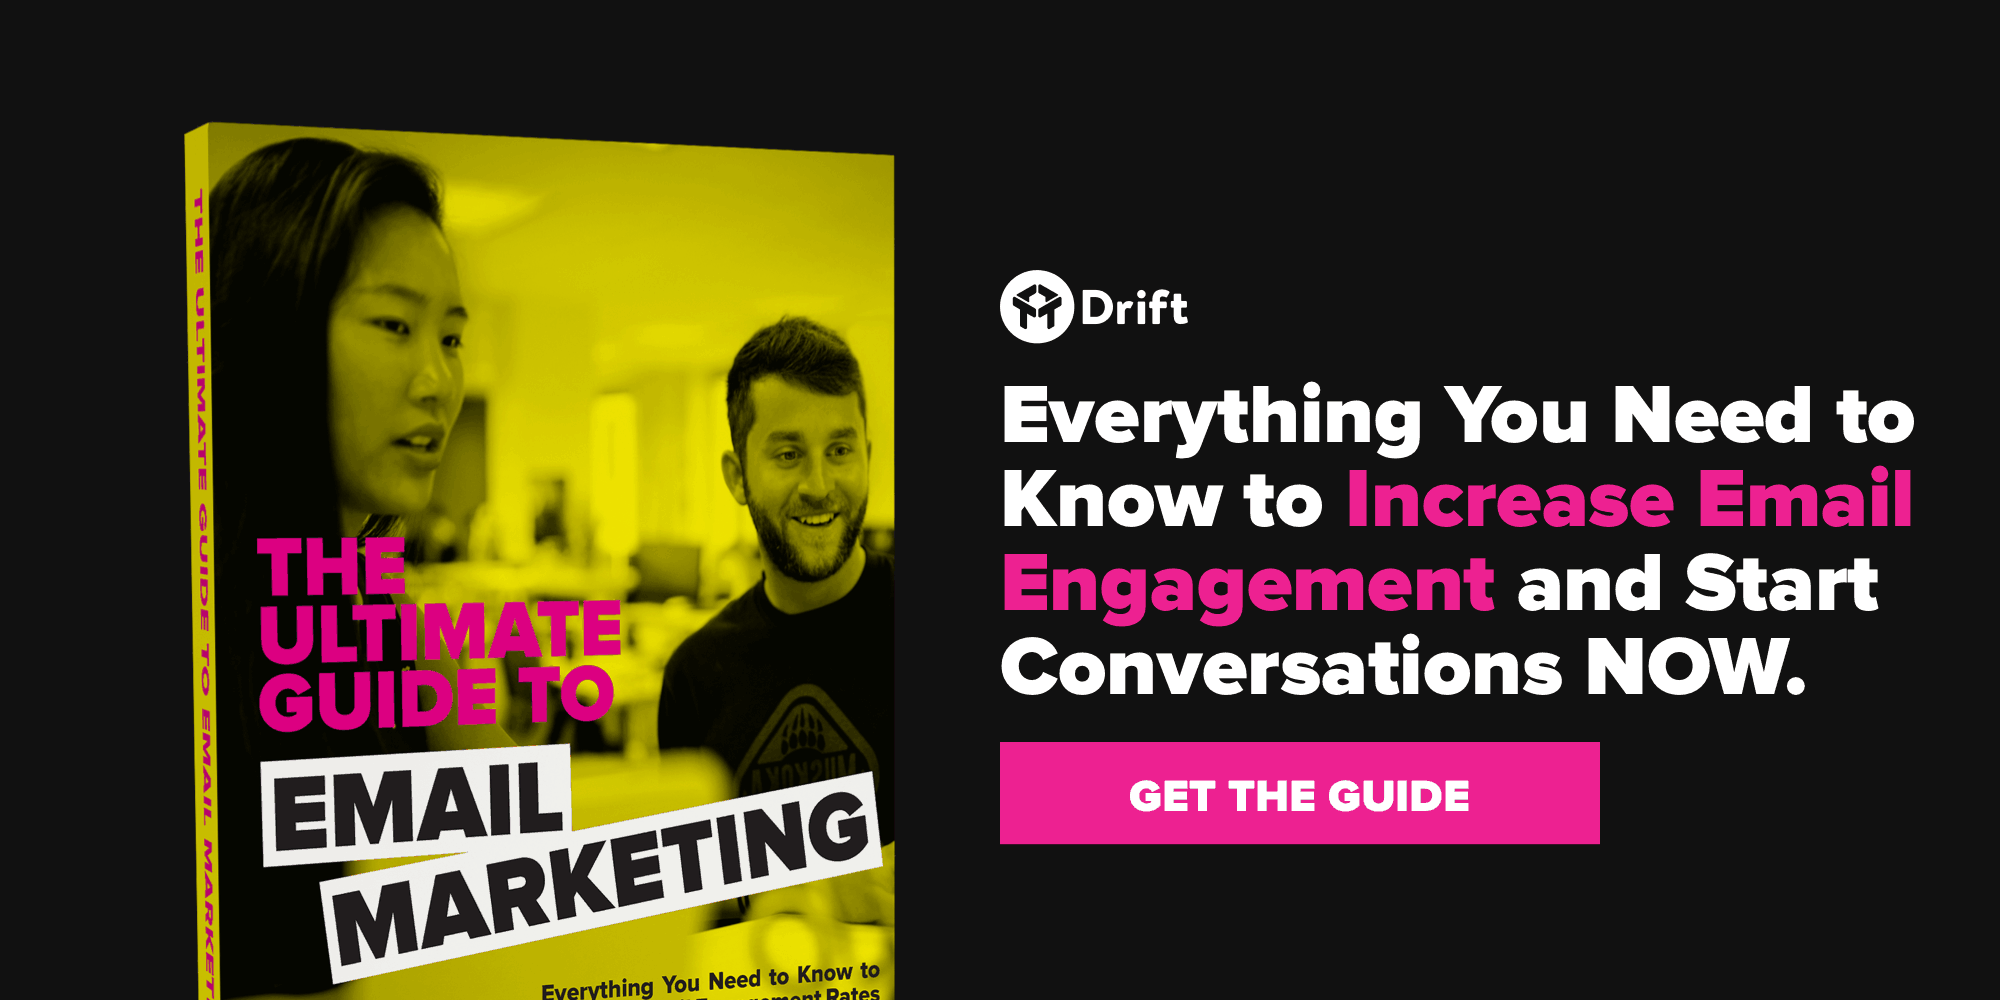 Drift Ultimate Email Marketing Guide